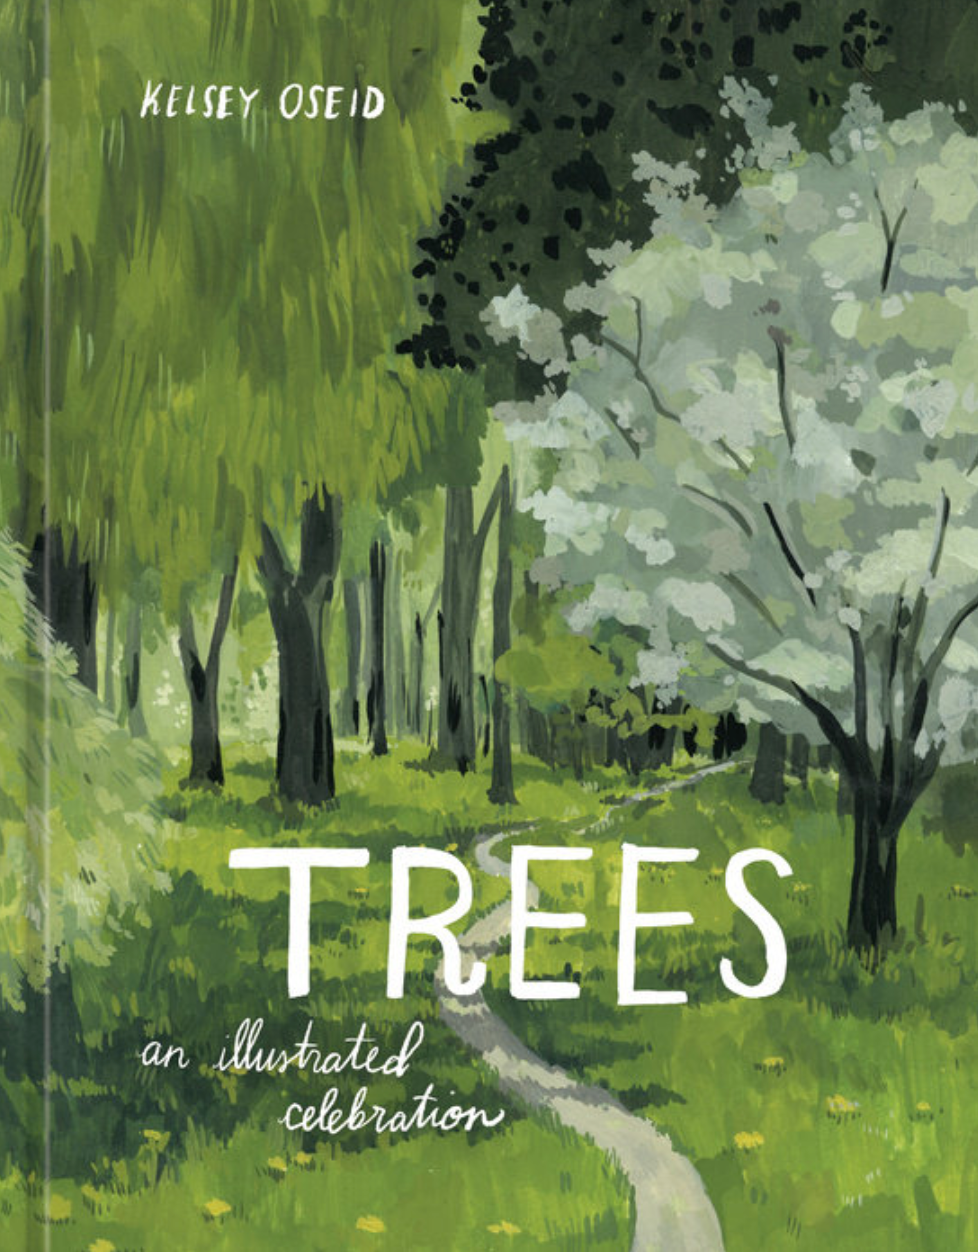 TREES an illustrated celebration by Kelsey Oseid